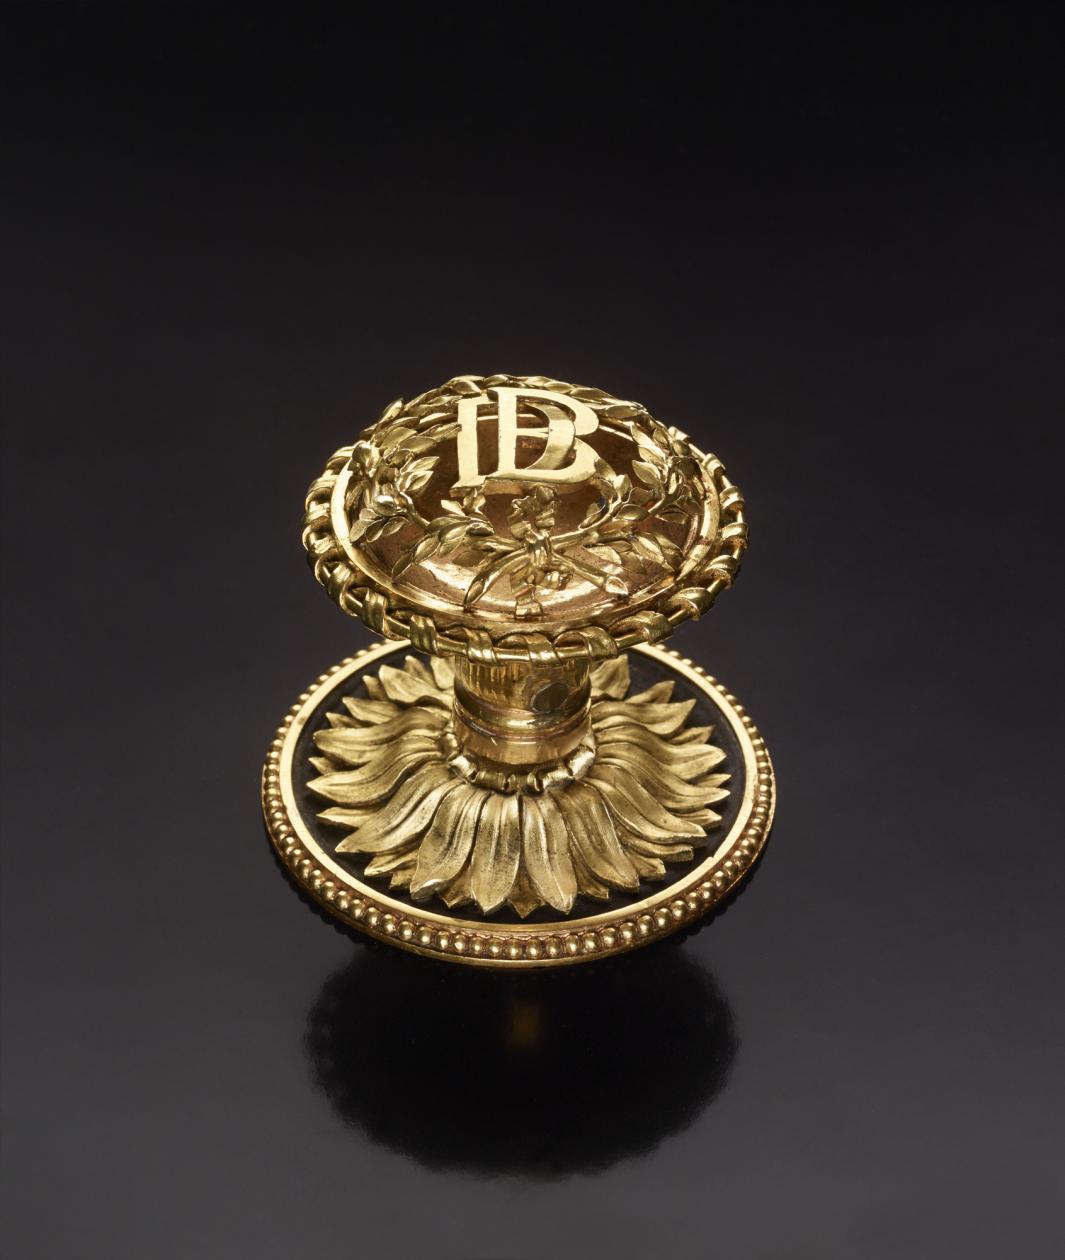 gilt bronze window knob, adorned with overlapping "DB" at its center